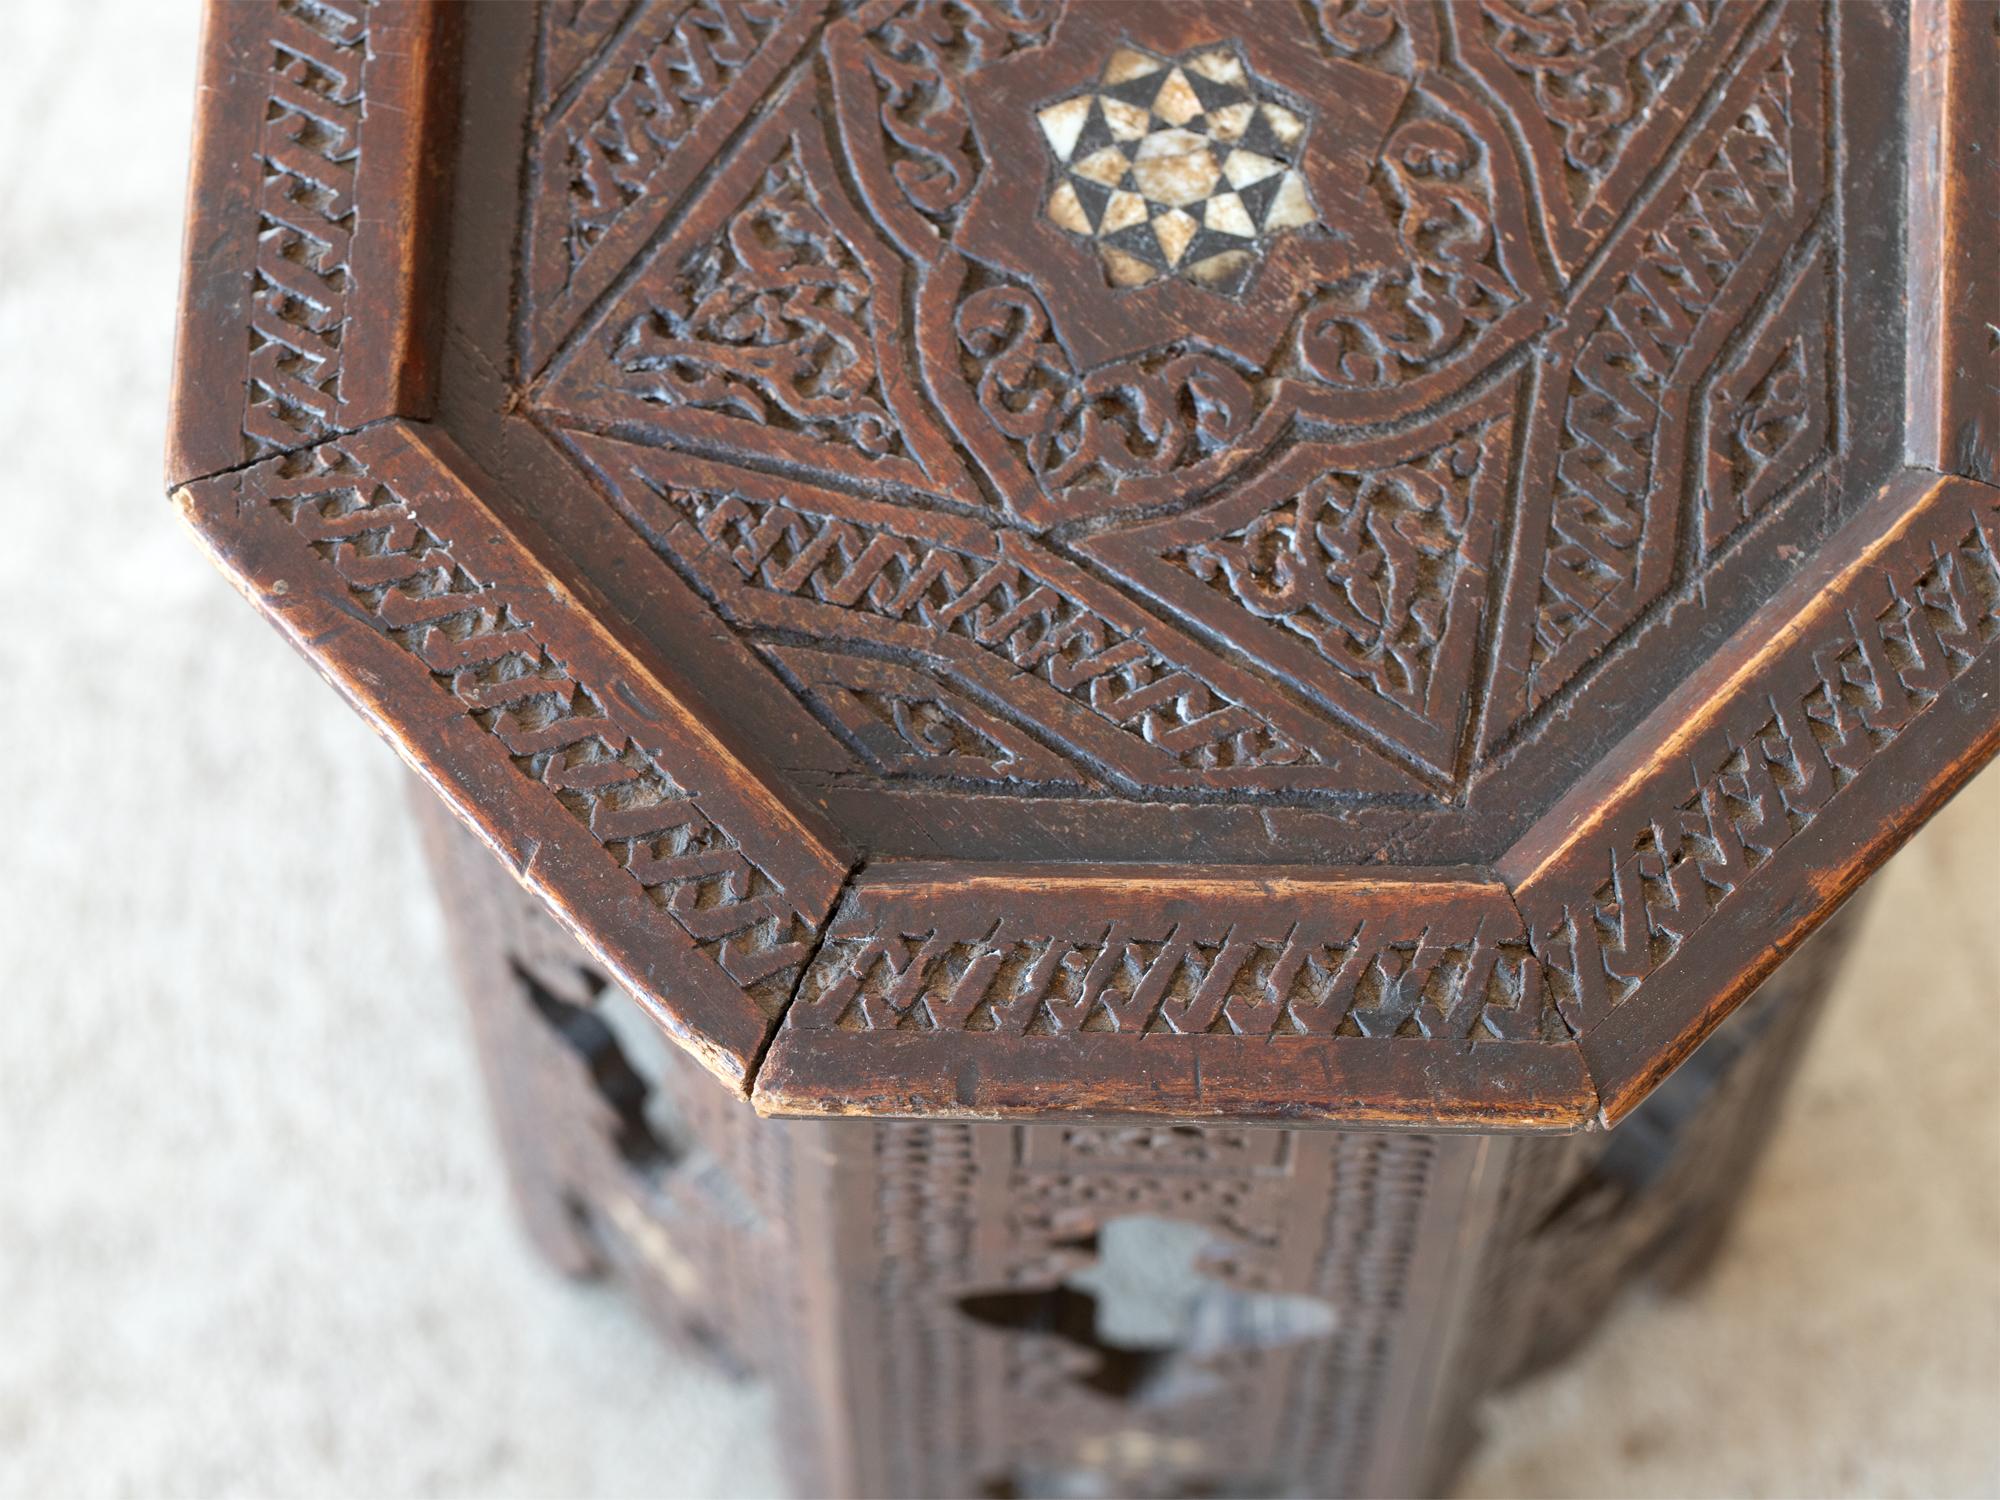 A diminutive carved Syrian side table with mother of pearl inlay, early 20C.

Stock ref. #2229

In very good order with light cosmetic wear.

40.5 x 28 x 28 cm

15.9 x 11.0 x 11.0 